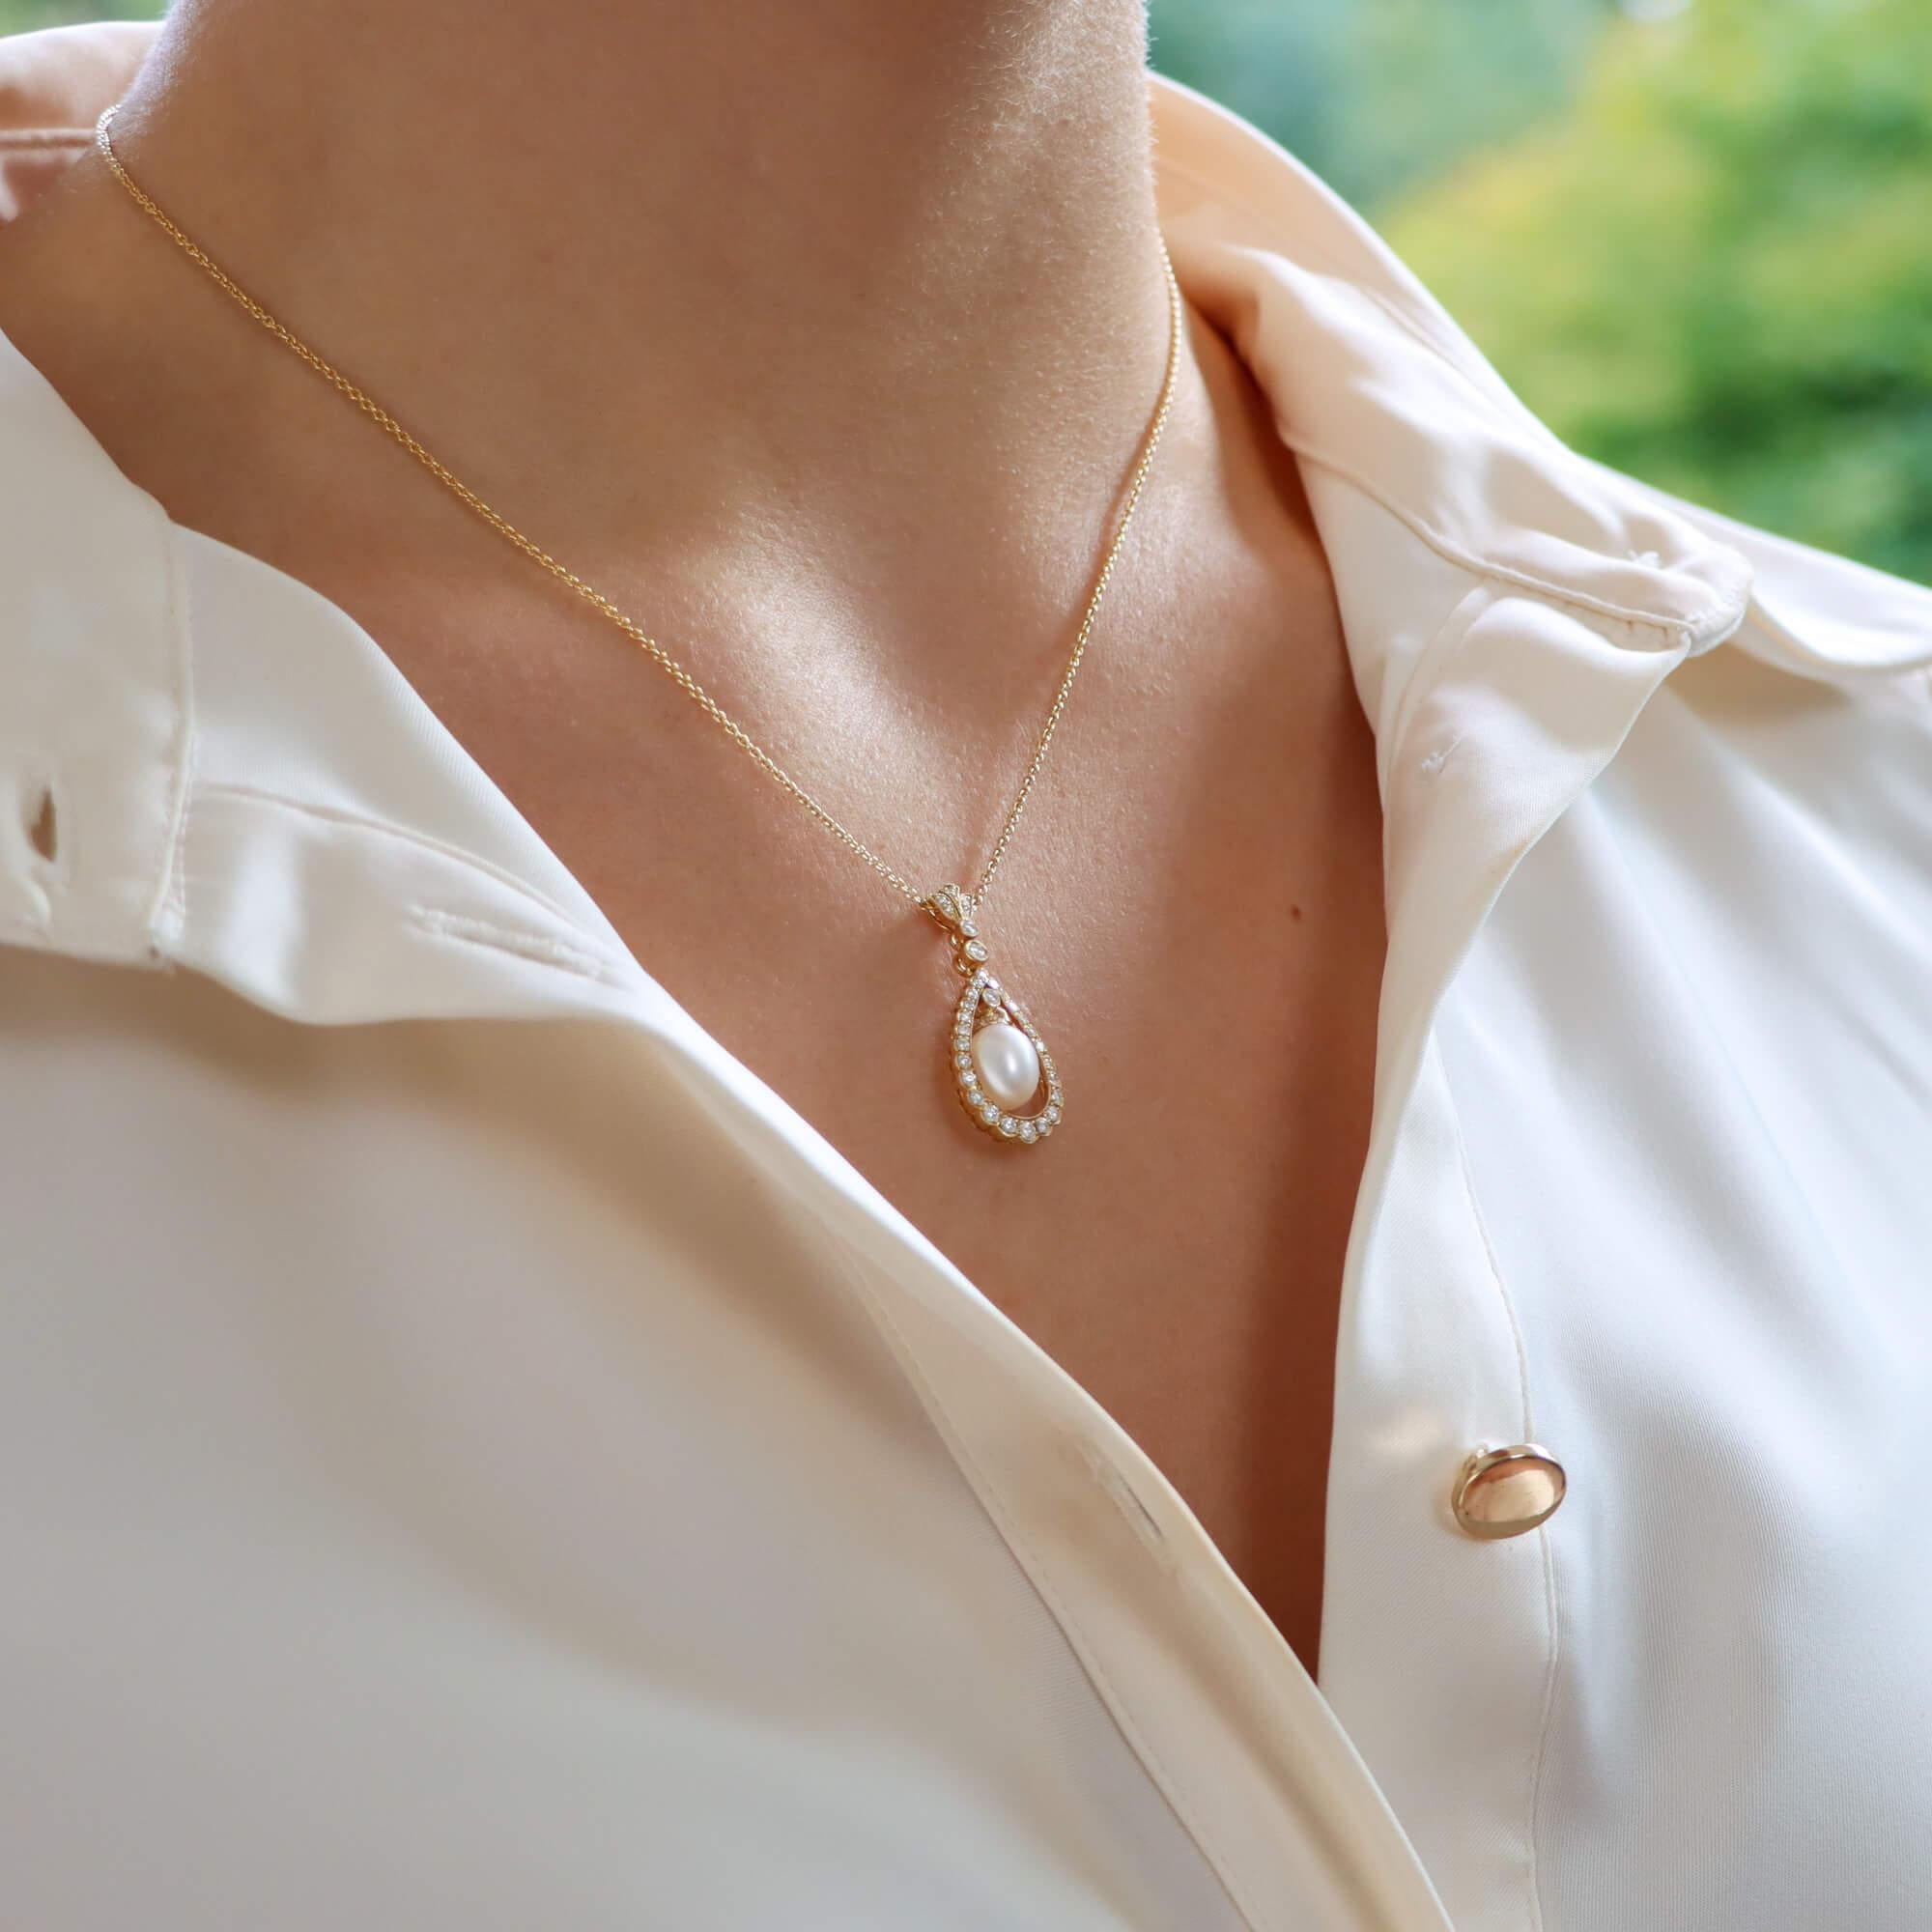 A fabulous cultured pearl and diamond garland pendant necklace set in 18k yellow gold.

The pendant prominently features a 6 x 8-millimetre pearl that elegantly hangs within a circular diamond set garland motif. To the top of the pearl is a single